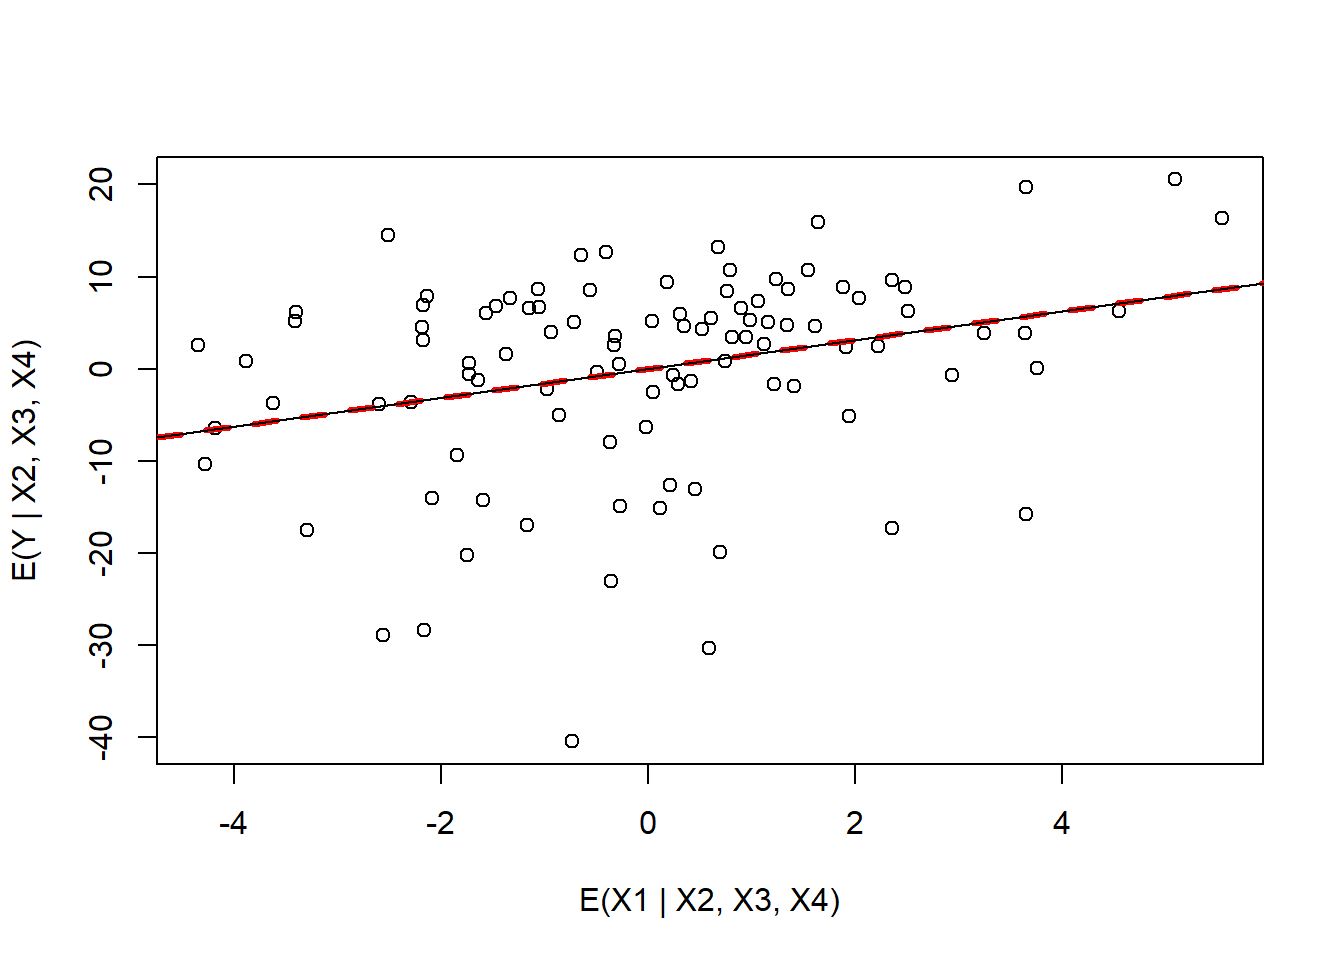 Added variable plot for variable x1 in the partialr data set.